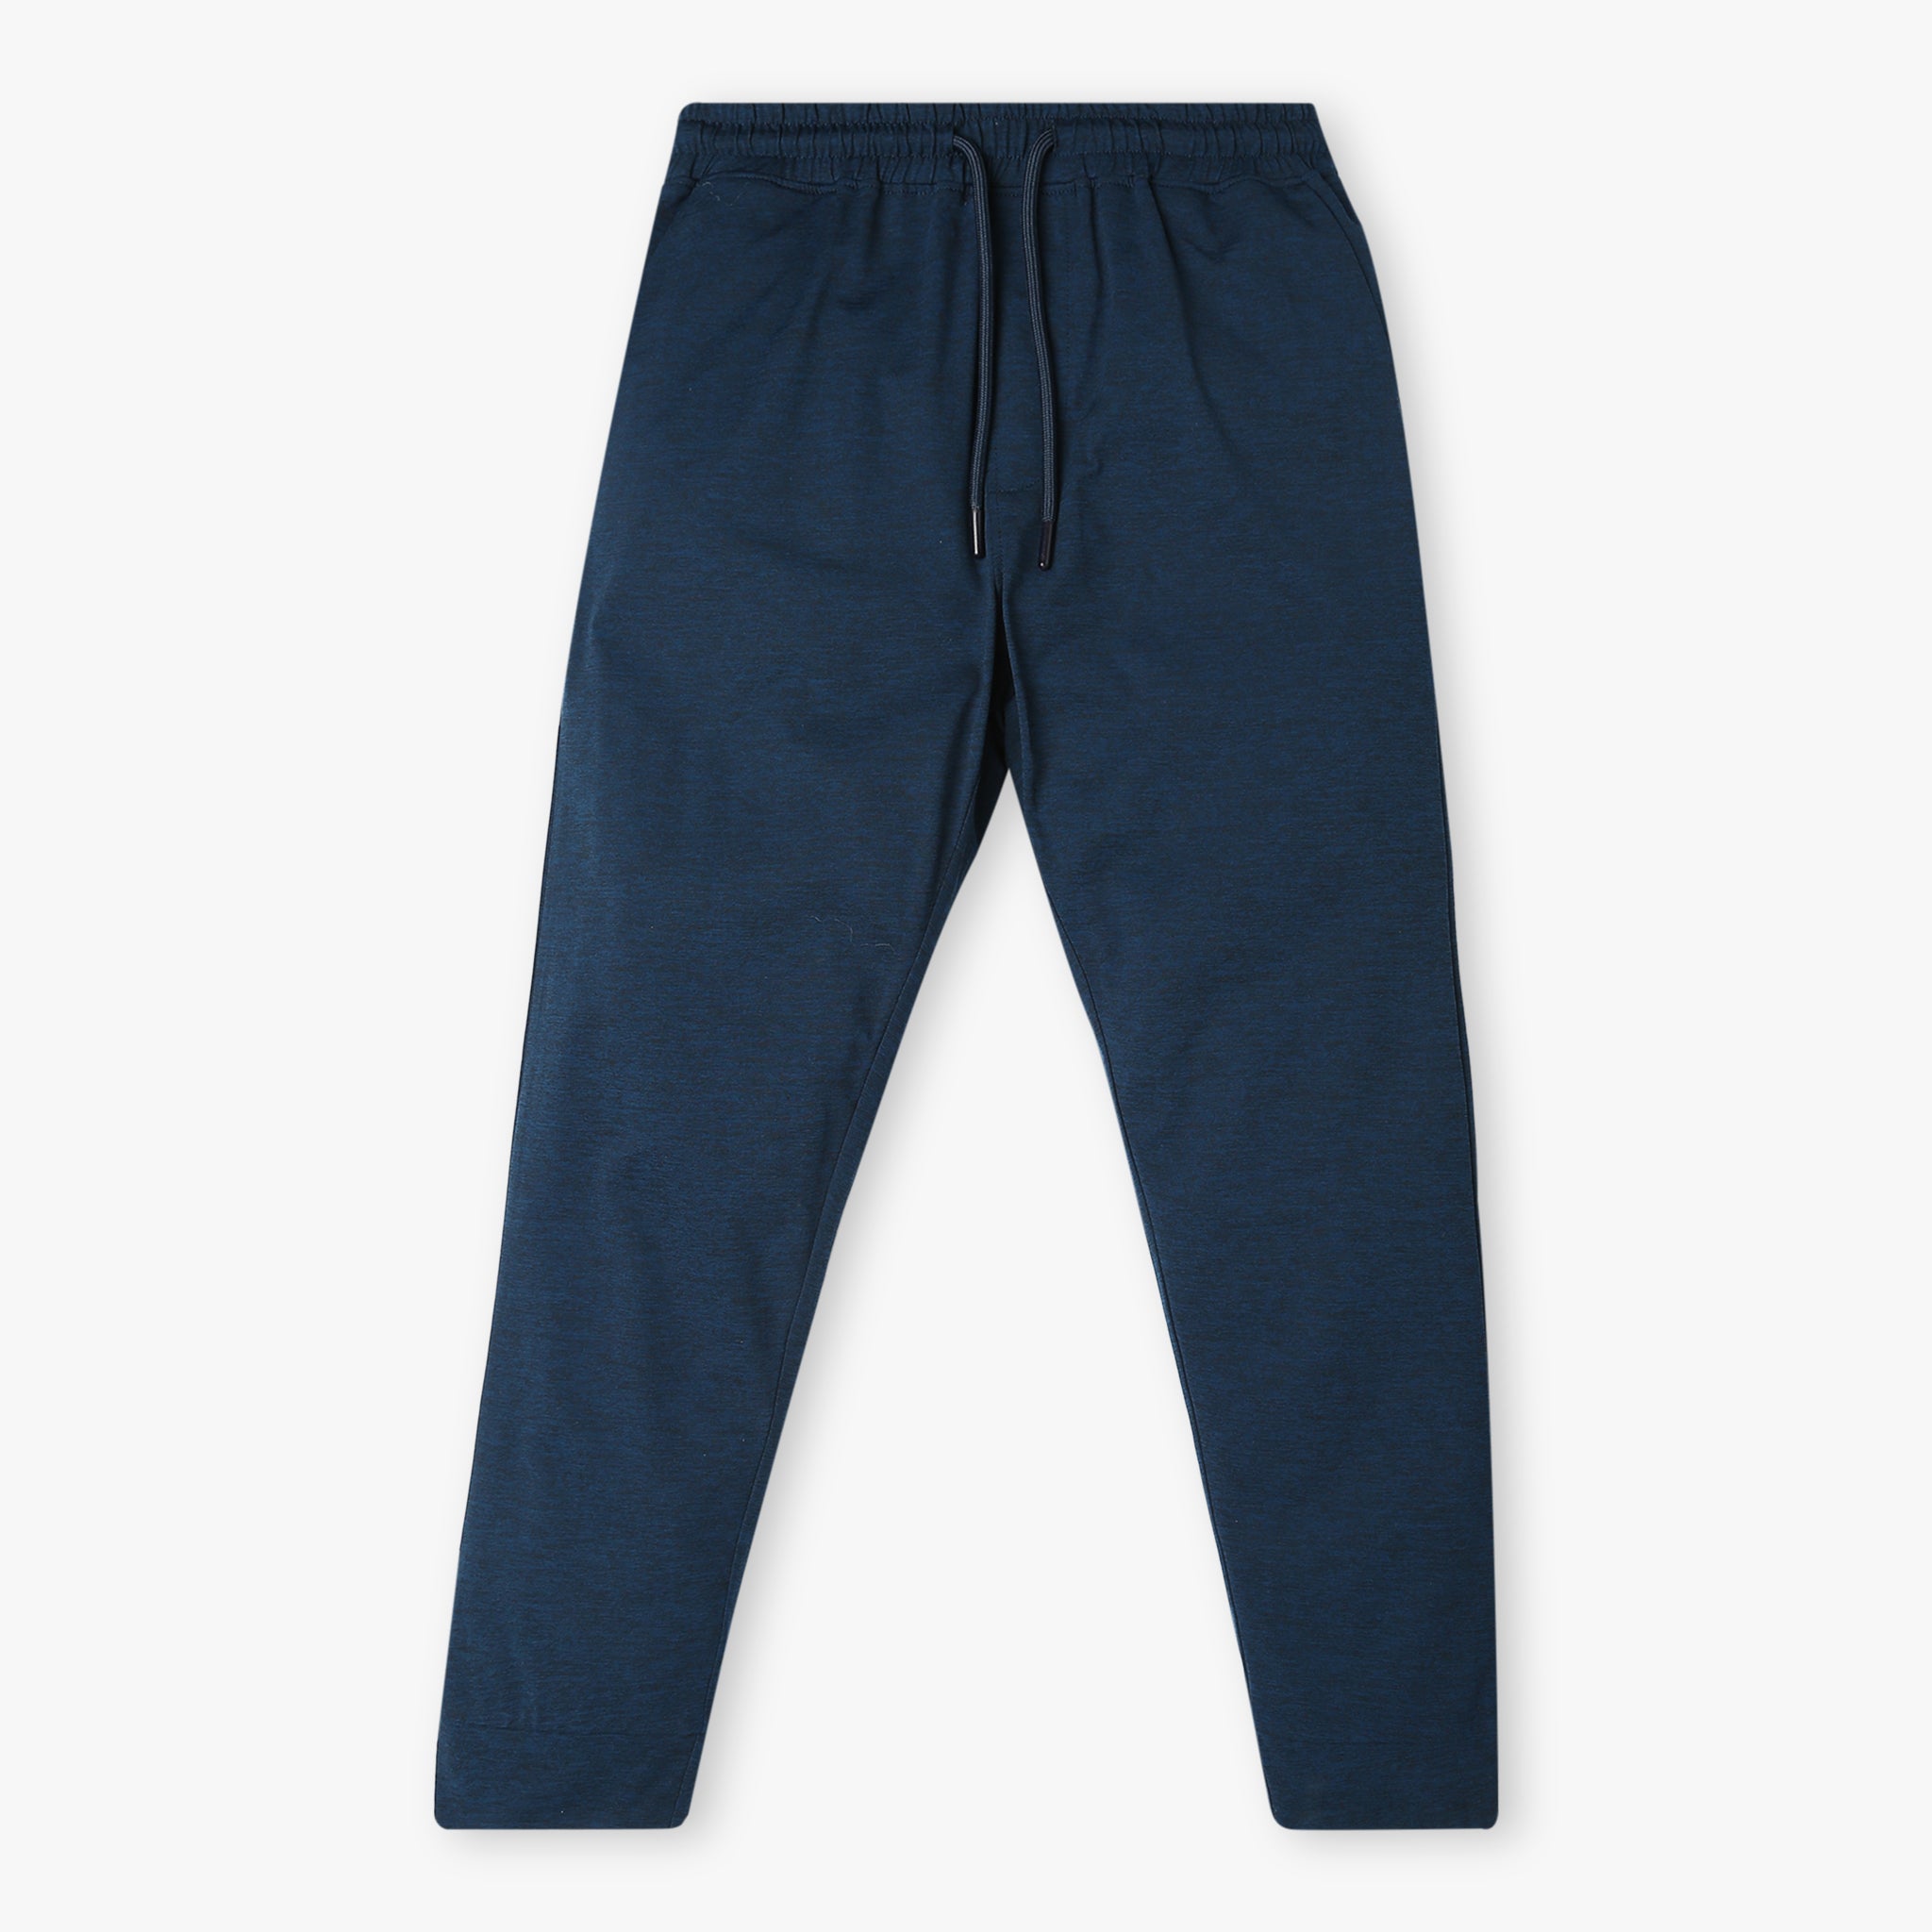 Boys Track Pants - Buy Track Pants for Boys & Kids online in India